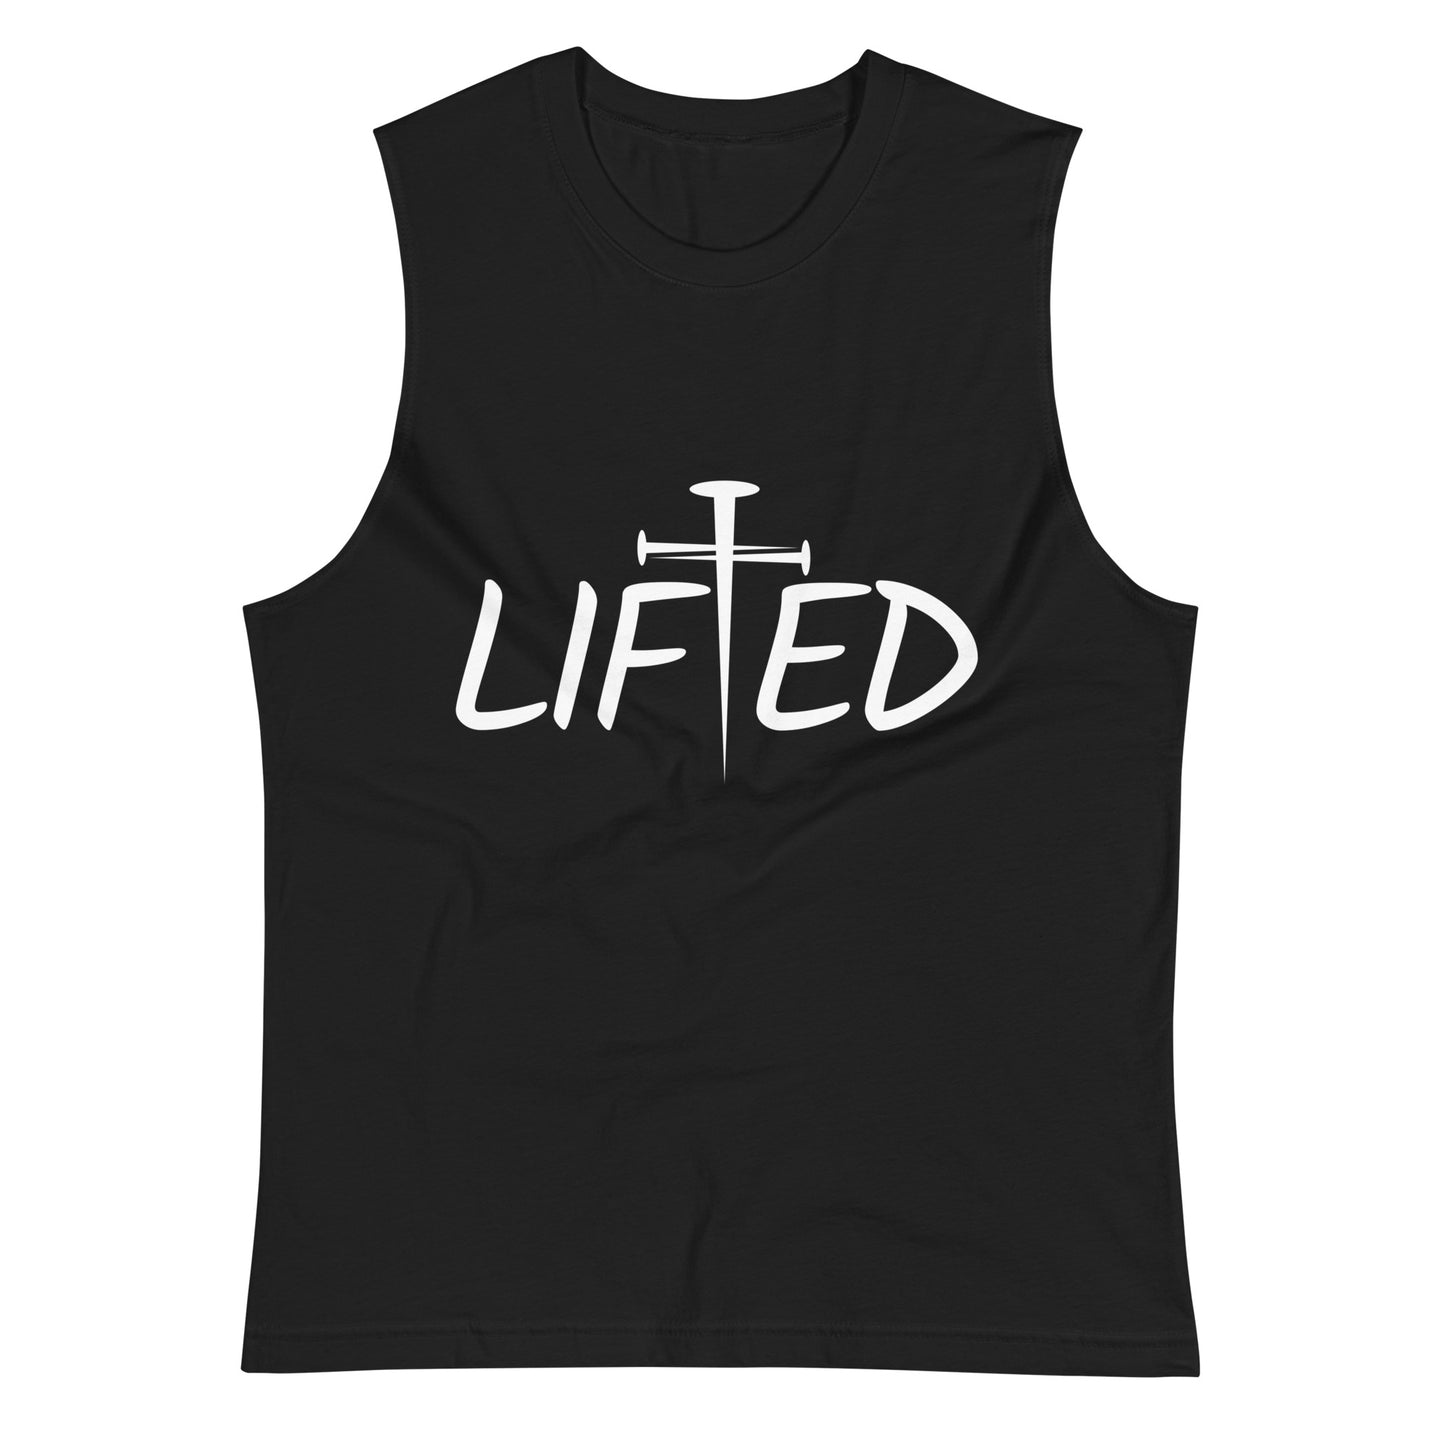 Lifted Muscle Shirt Black